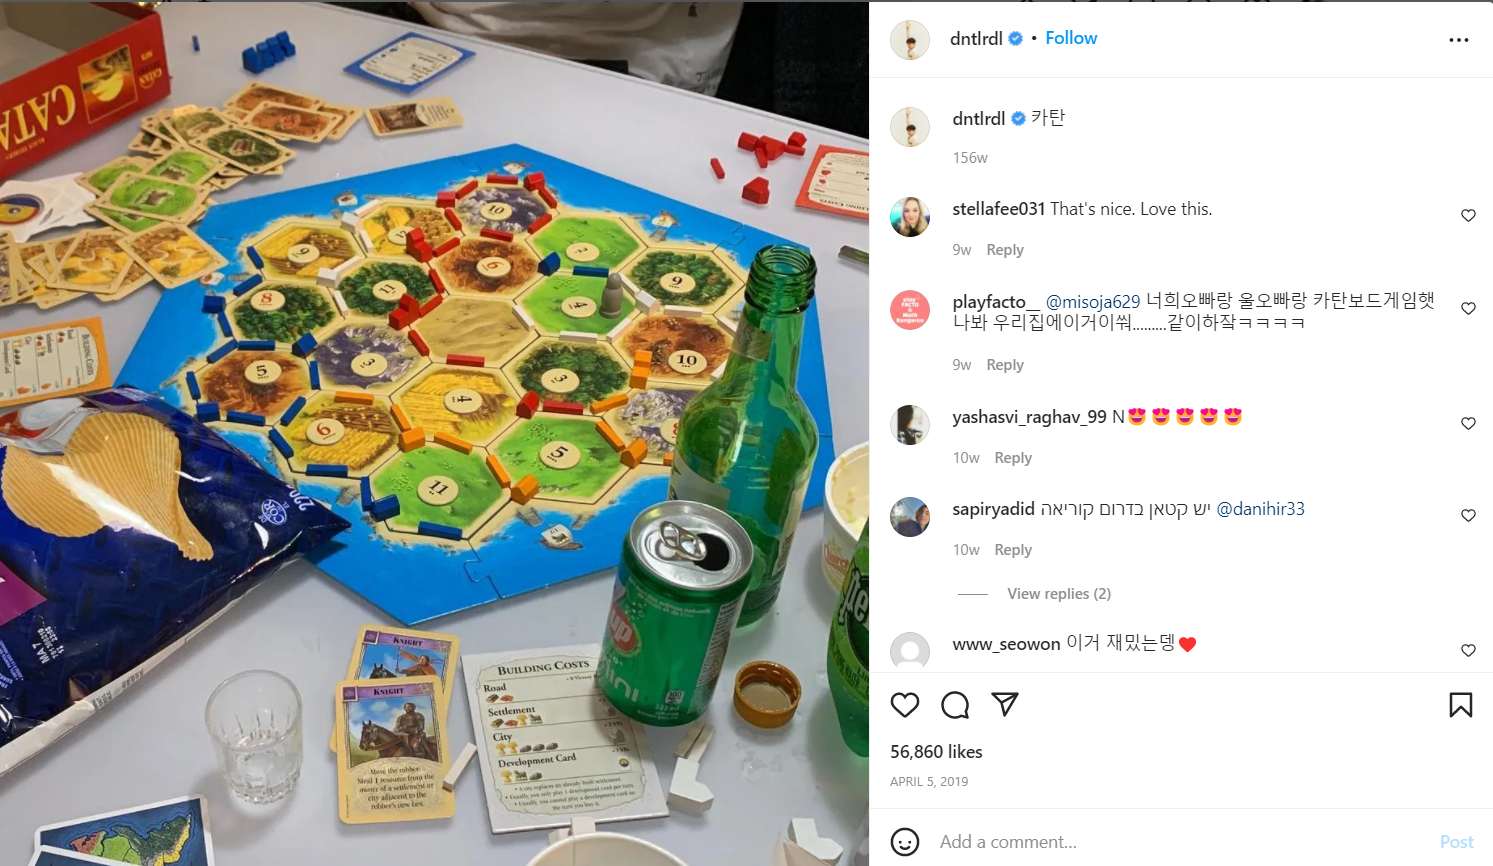 Choi Woo-shik posted about playing Catan with his friends